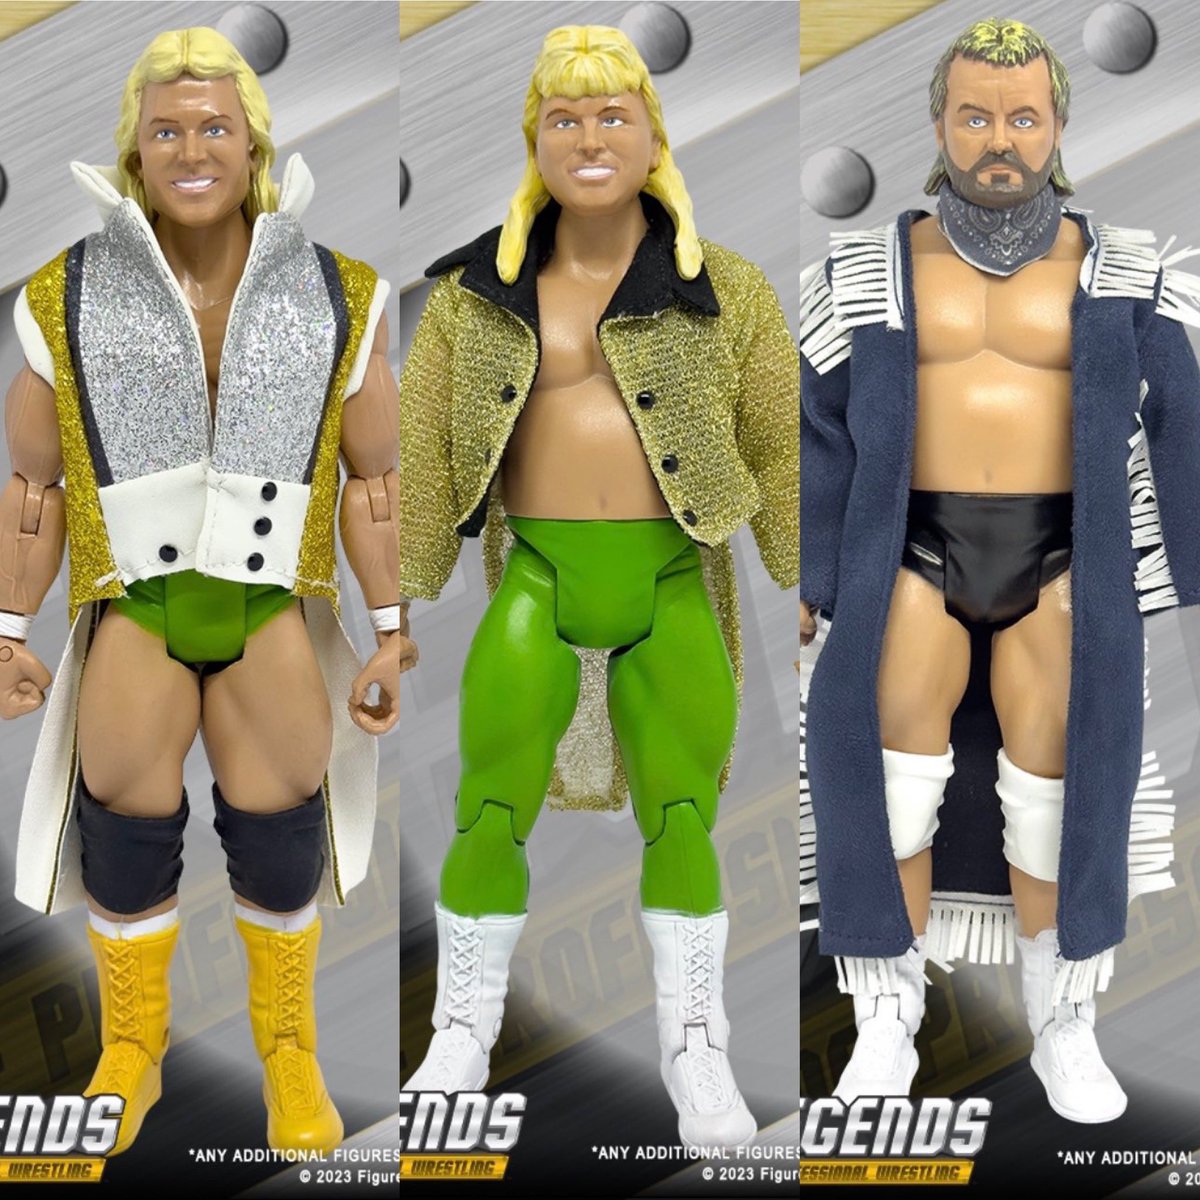 New Legends of Professional Wrestling figures from @figurestoycompany are available now! -Stan Lane -Bobby Eaton -Dennis Condrey Do you have an FTC collection? #figheel #CaseFreshPod #freshshots #actionfigures #toycommunity #toycollector #wrestlingfigures #wwe #aew #njpw